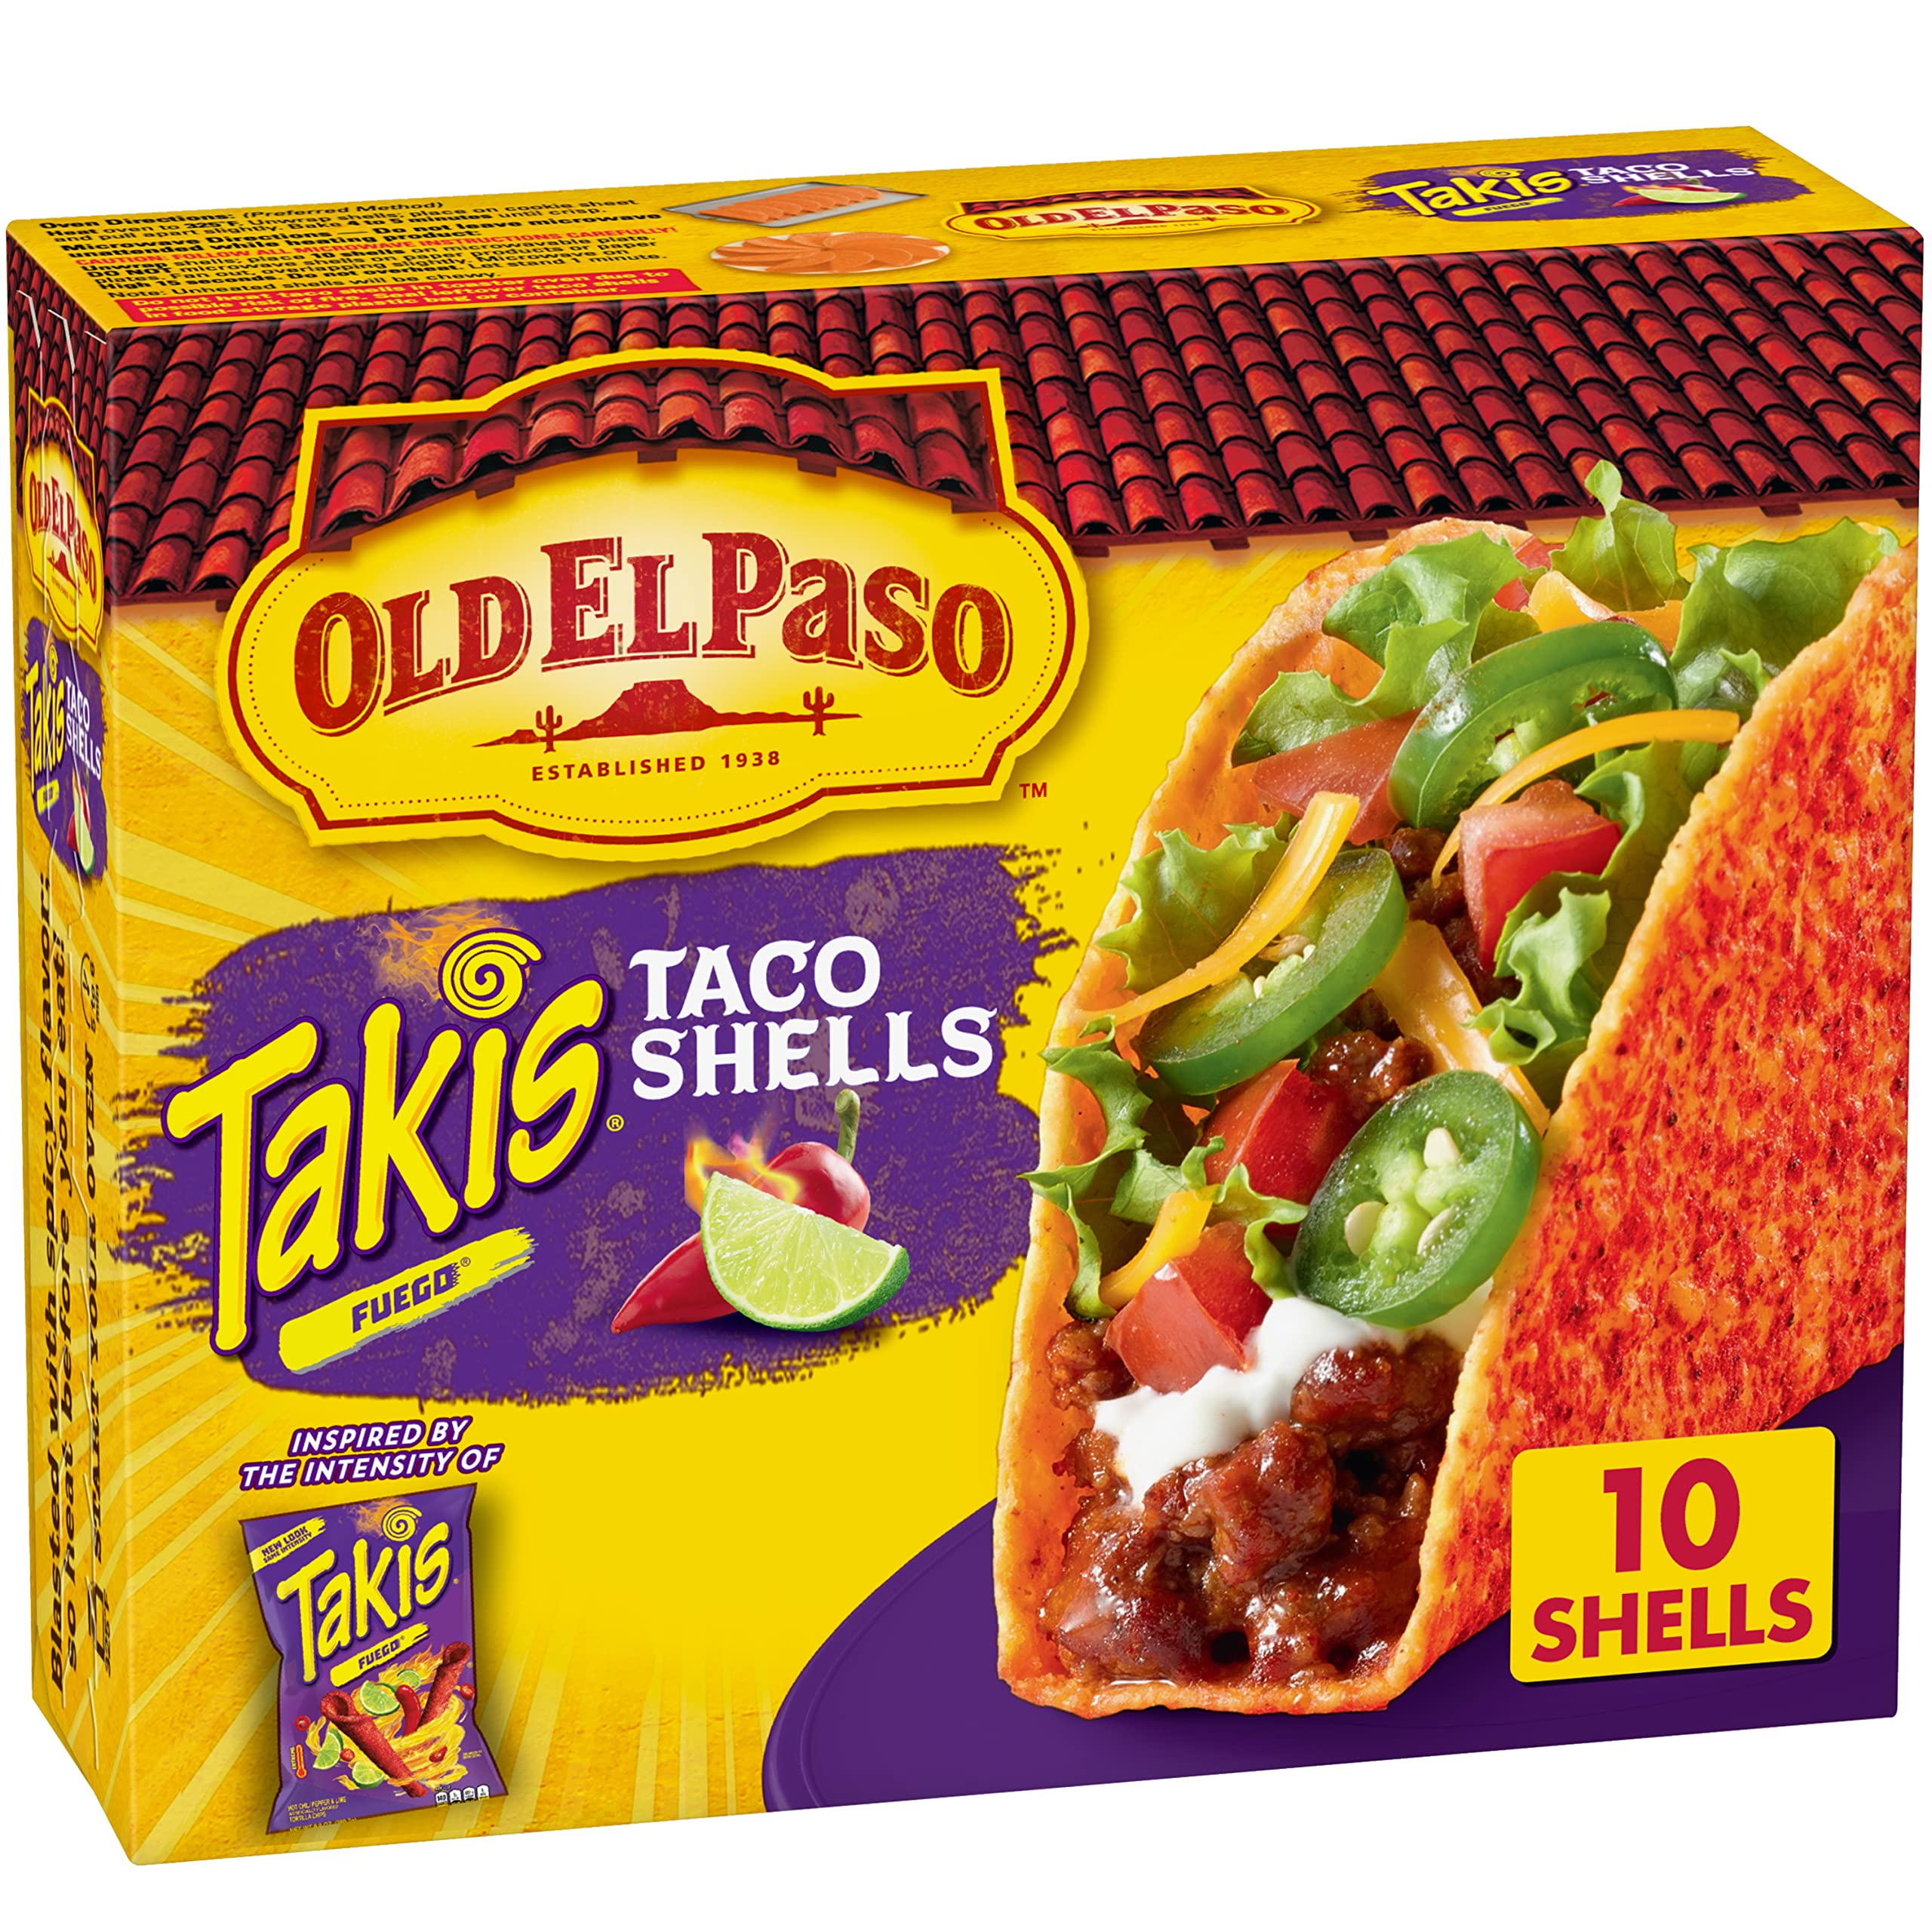 10-Count Old El Paso Takis Fuego Stand 'N Stuff Taco Shells (Takis Fuego) $2.54 w/ S&S + Free Shipping w/ Prime or Orders $25+